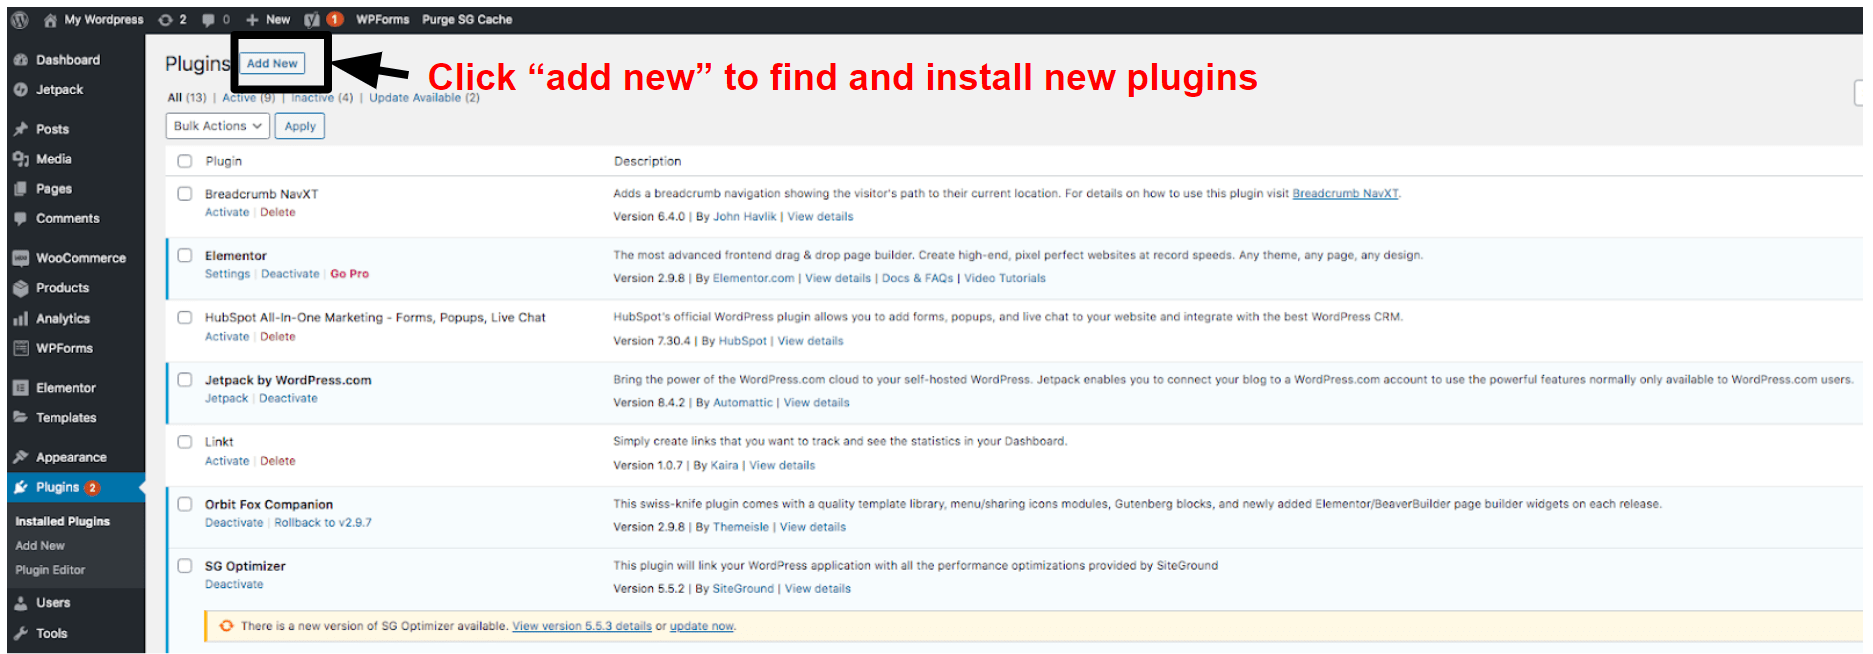 manage your installed plugins in WordPress